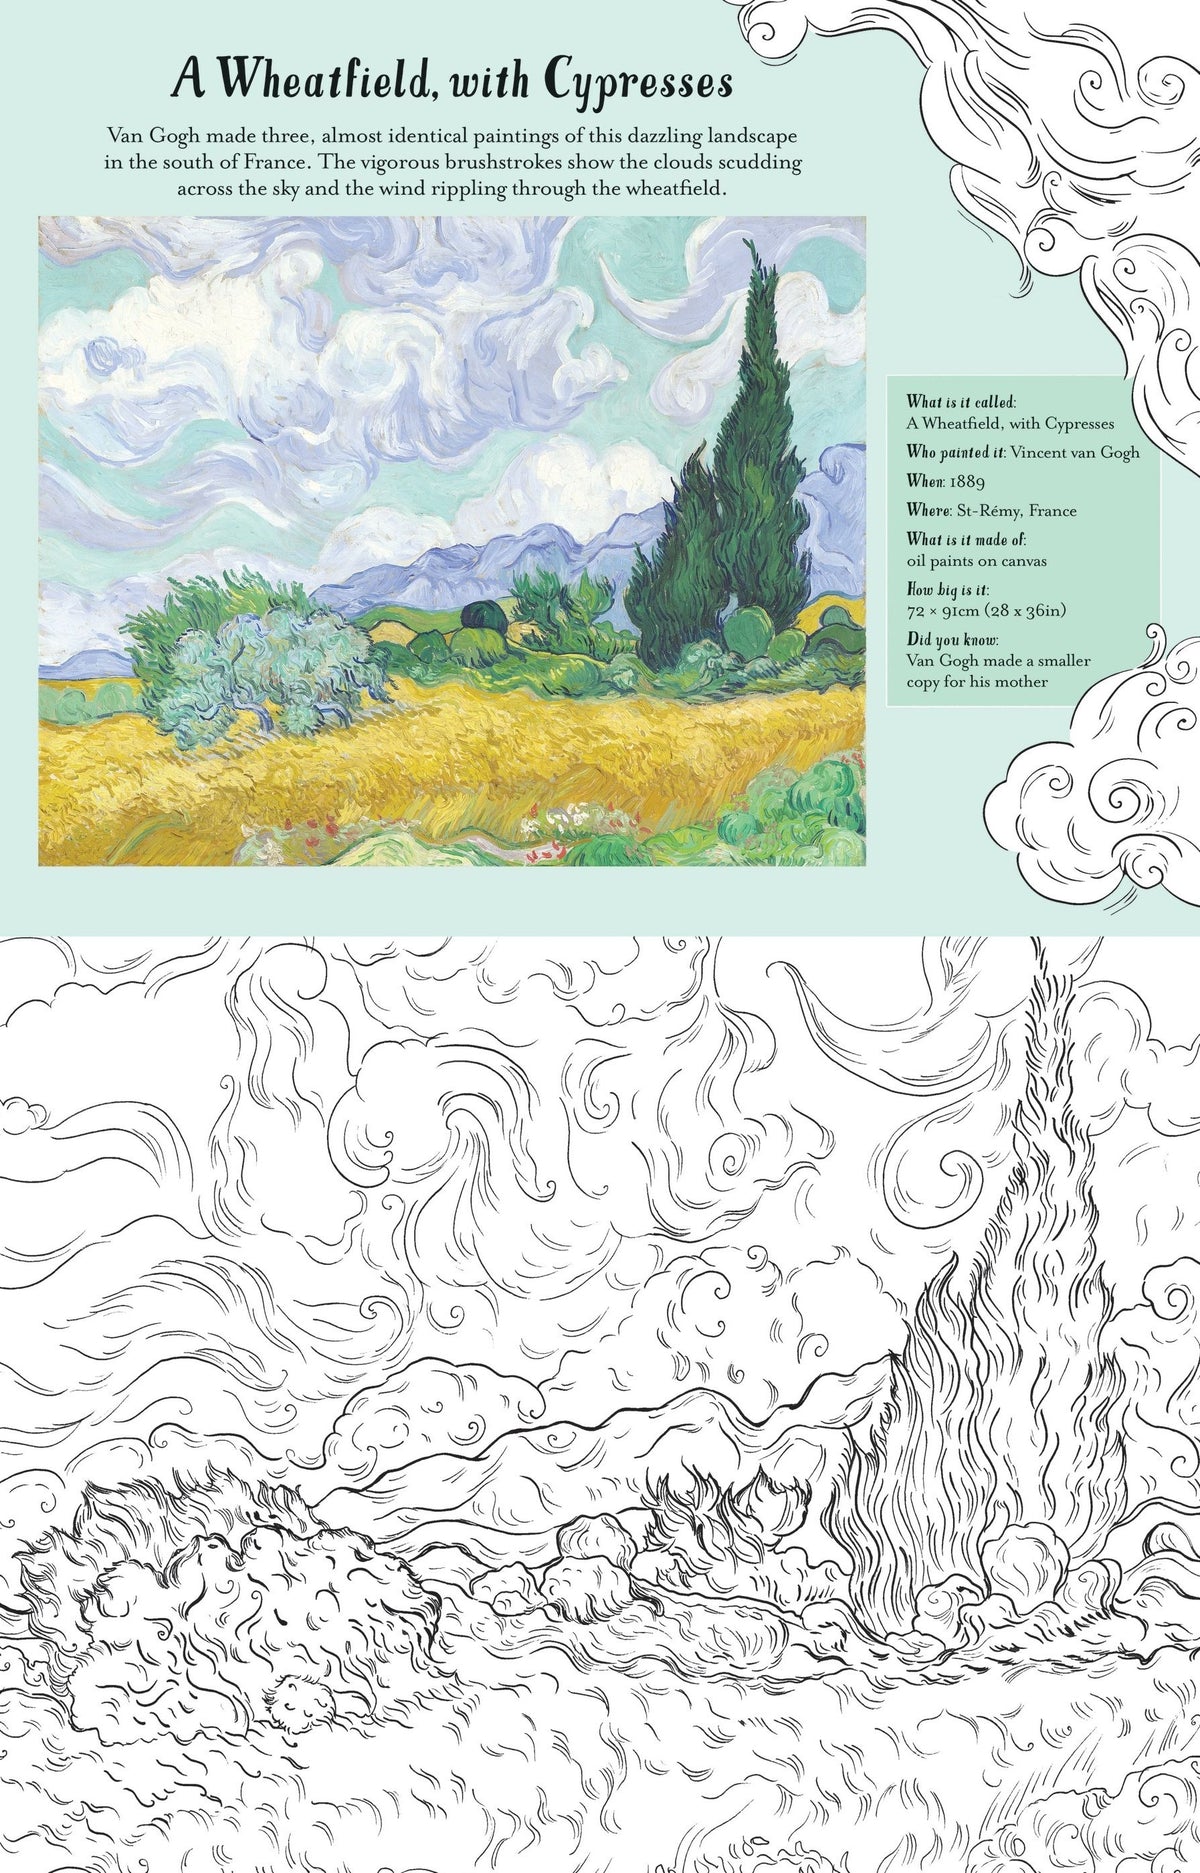 An example of a 2 page spread of this colouring book. The top page sets out the painting, artist and some background whilst the bottom page is the same artwork but line drawing only.